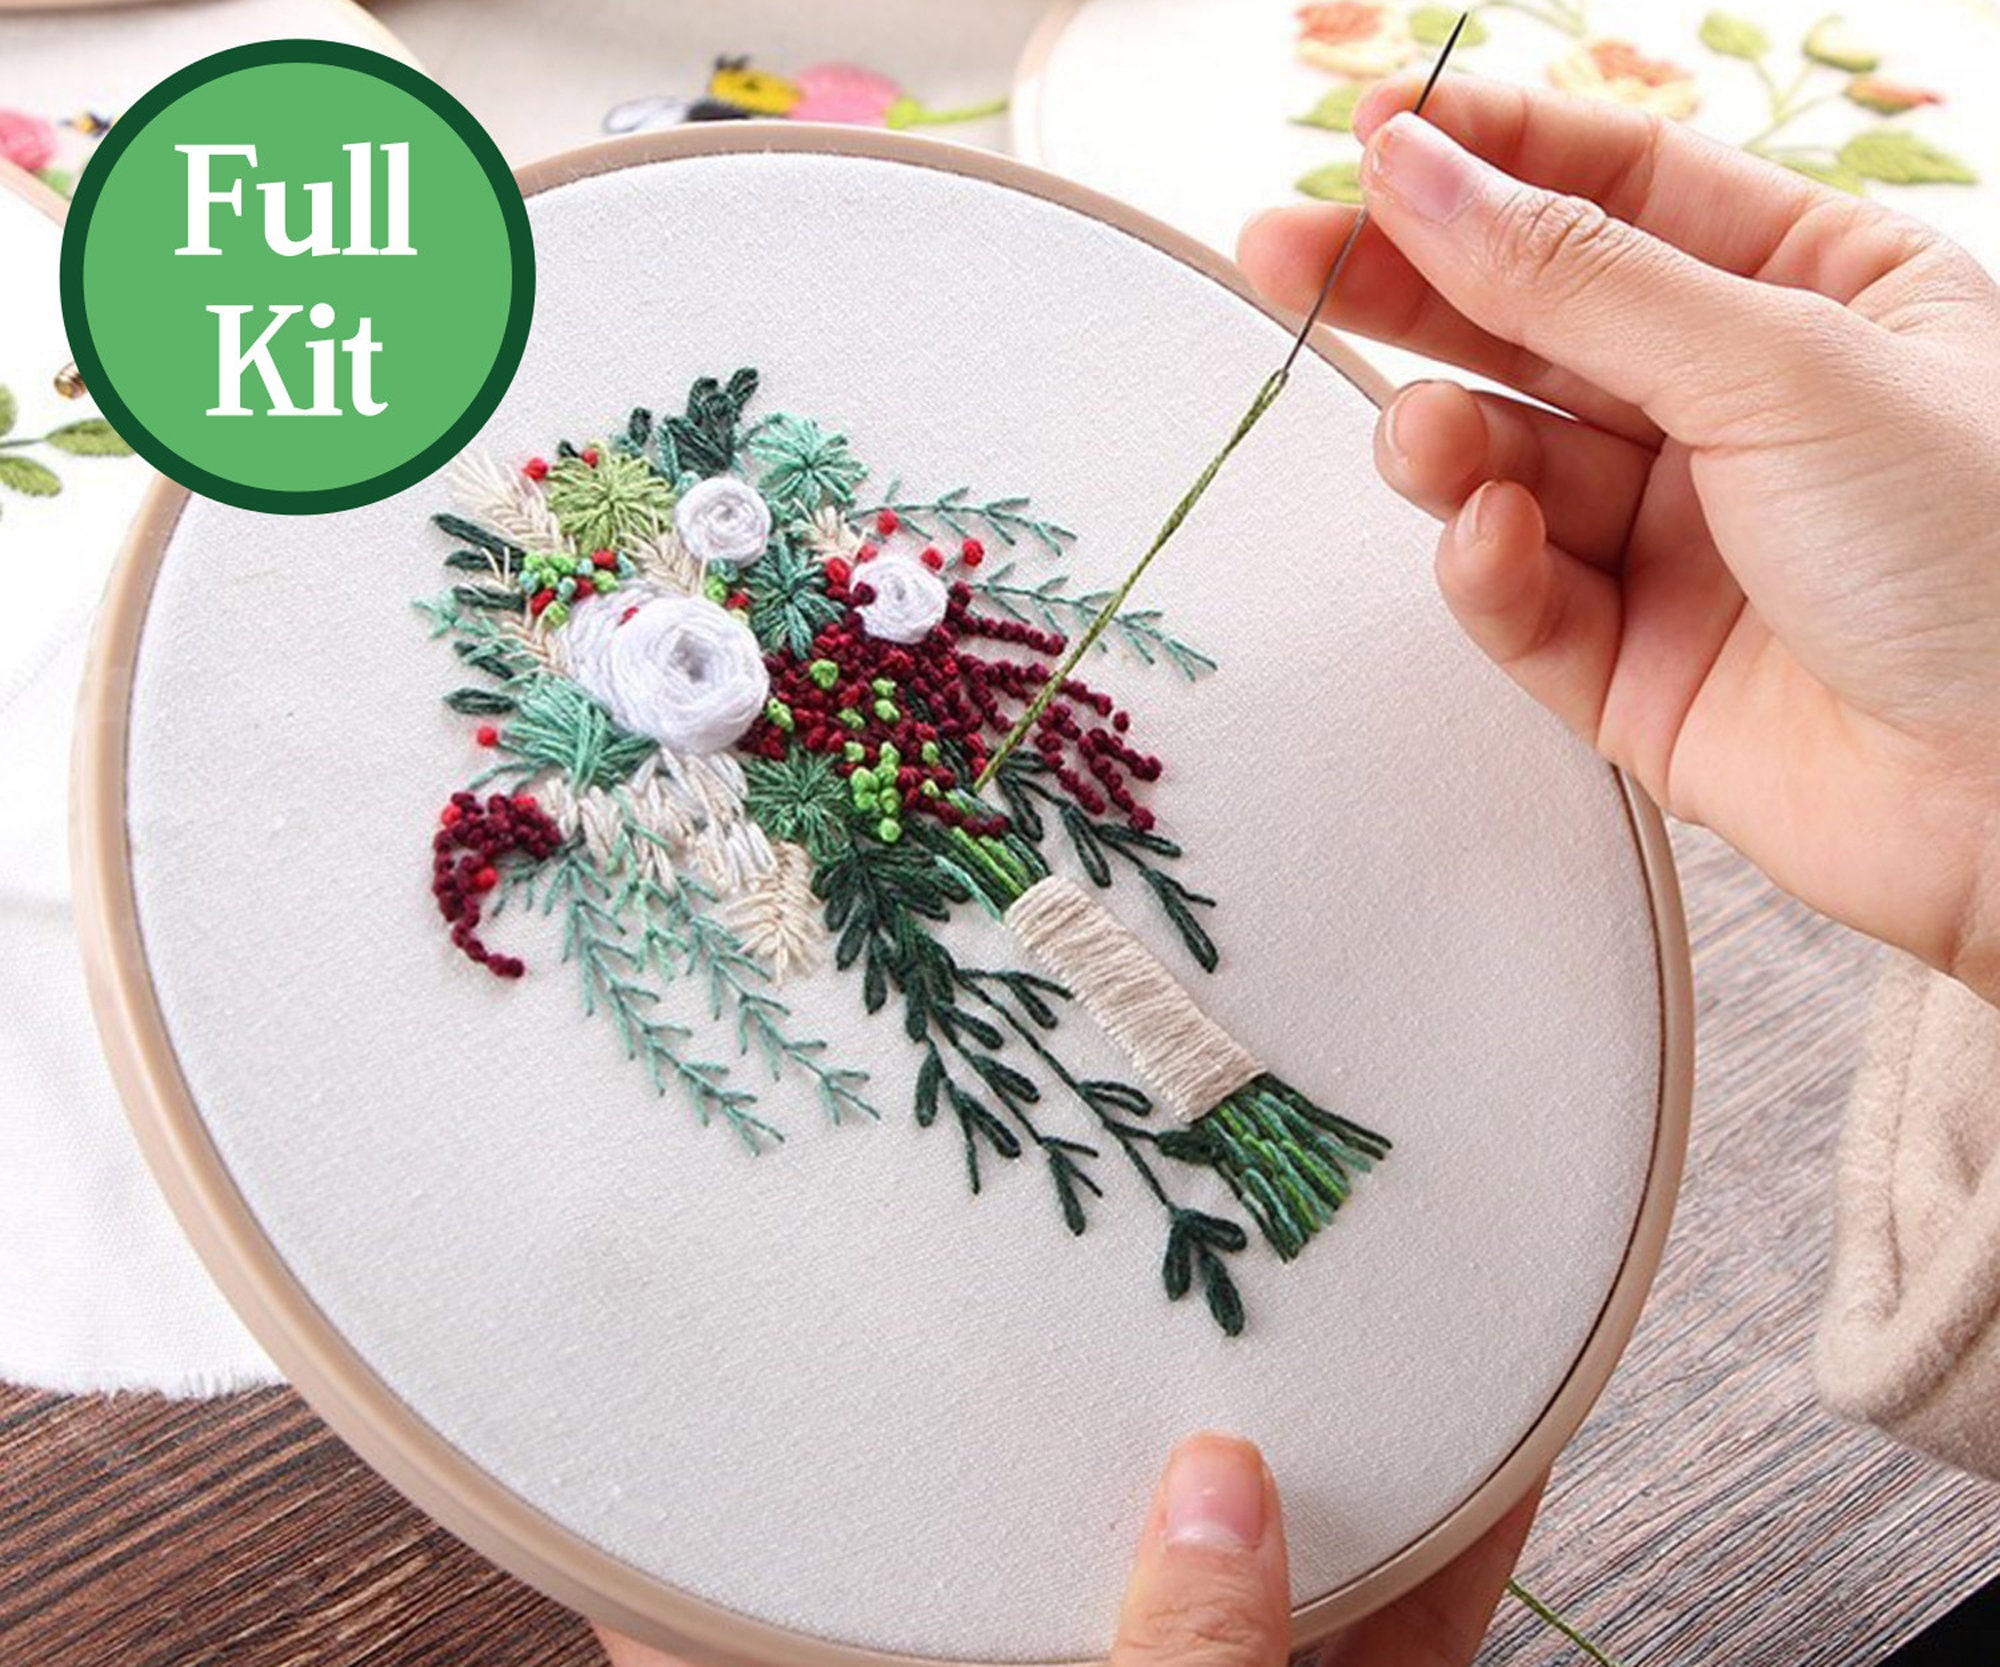 materials included Embroidery kit gift idea tansy print pillow flowers cross stitch embroidery kit modern hand embroidery